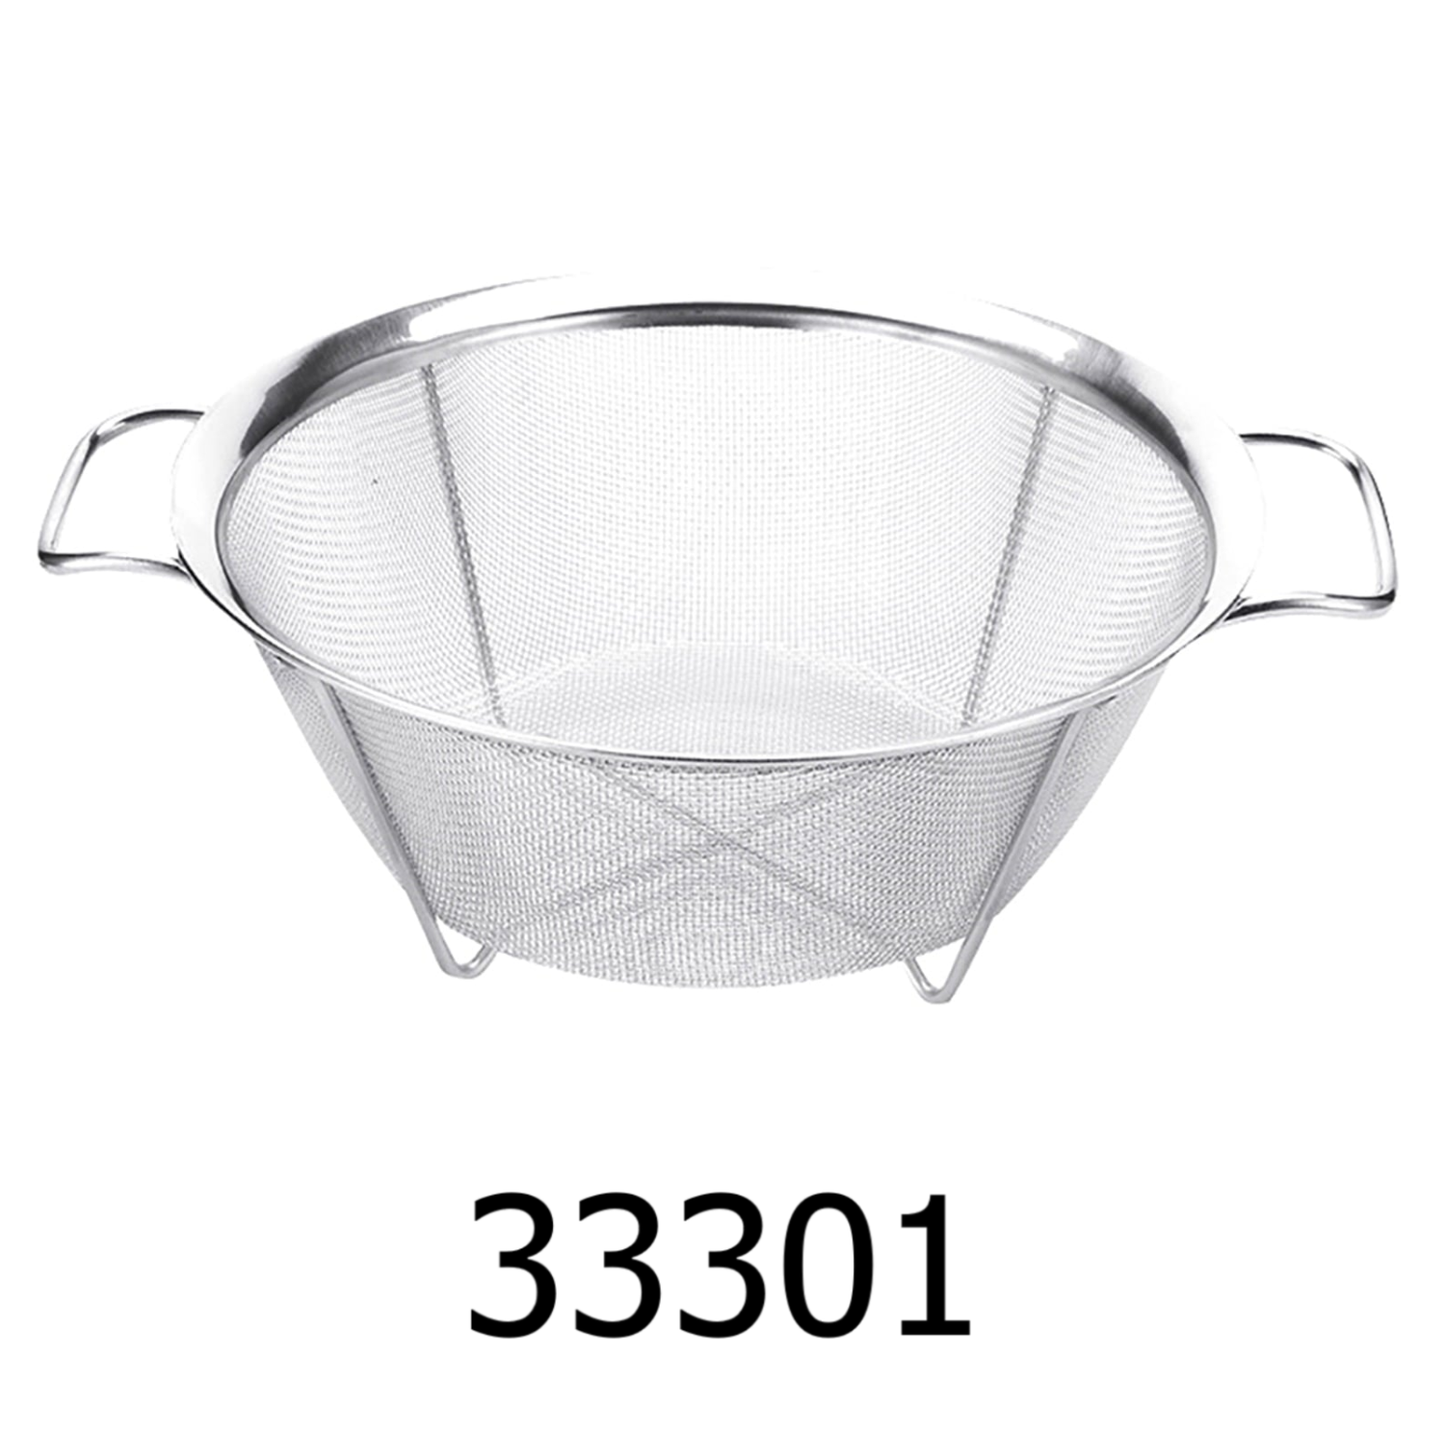 8.9" Stainless Steel Double Handles Strainer / Colander